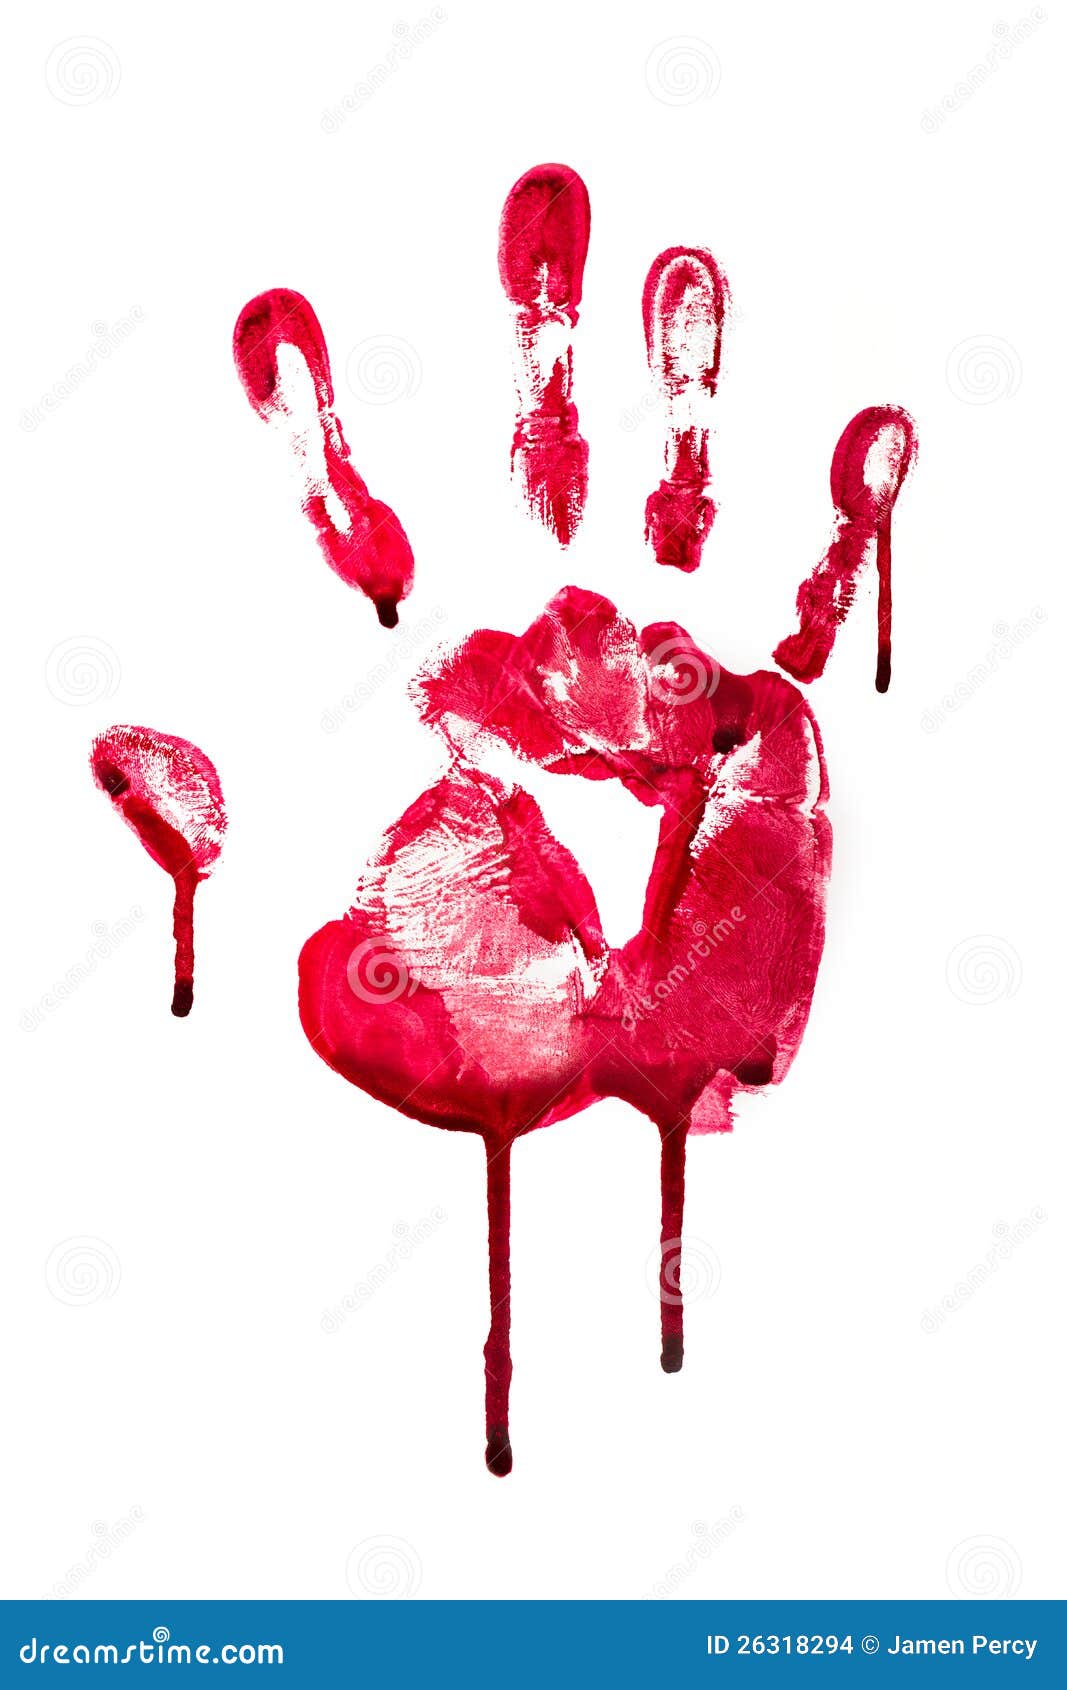 clipart bloody hand - photo #20